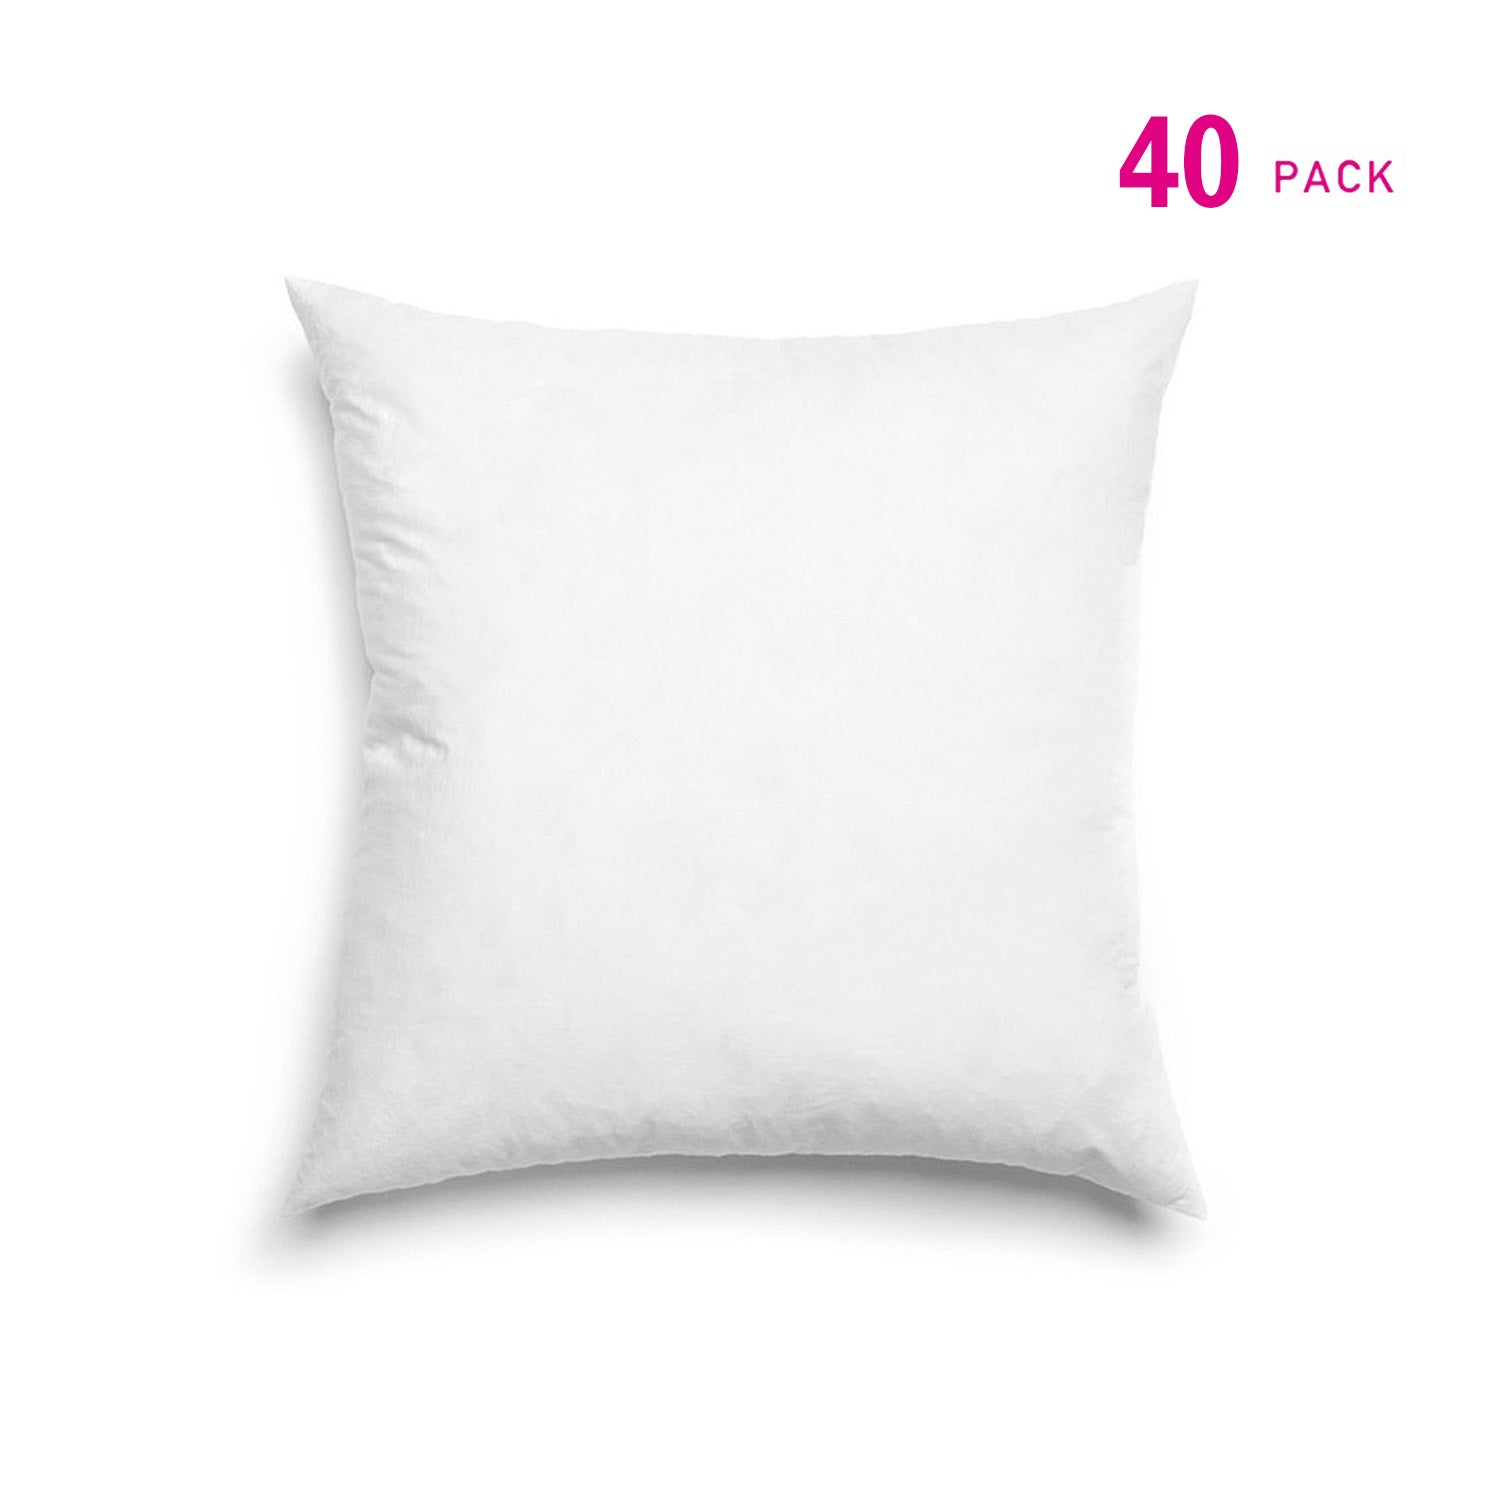 Pillow Inserts 18x18 Cushion Filler Square Toss Stuffing or Stuffing for  Sham Pillows 18 Inch 